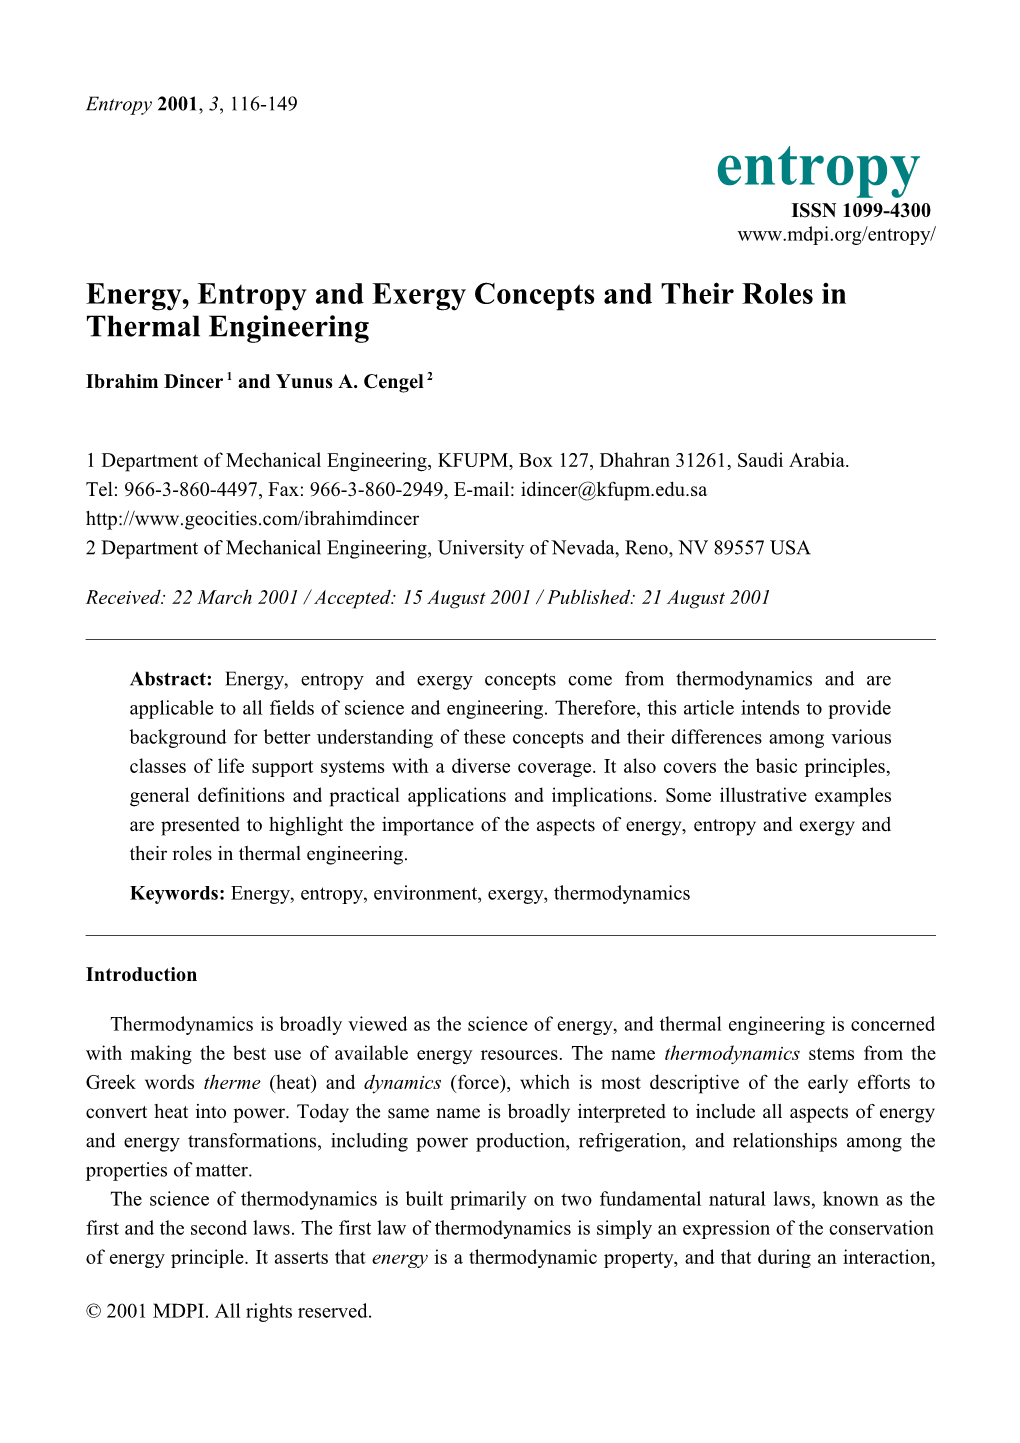 Energy, Entropy and Exergy Concepts and Their Roles in Thermal Engineering